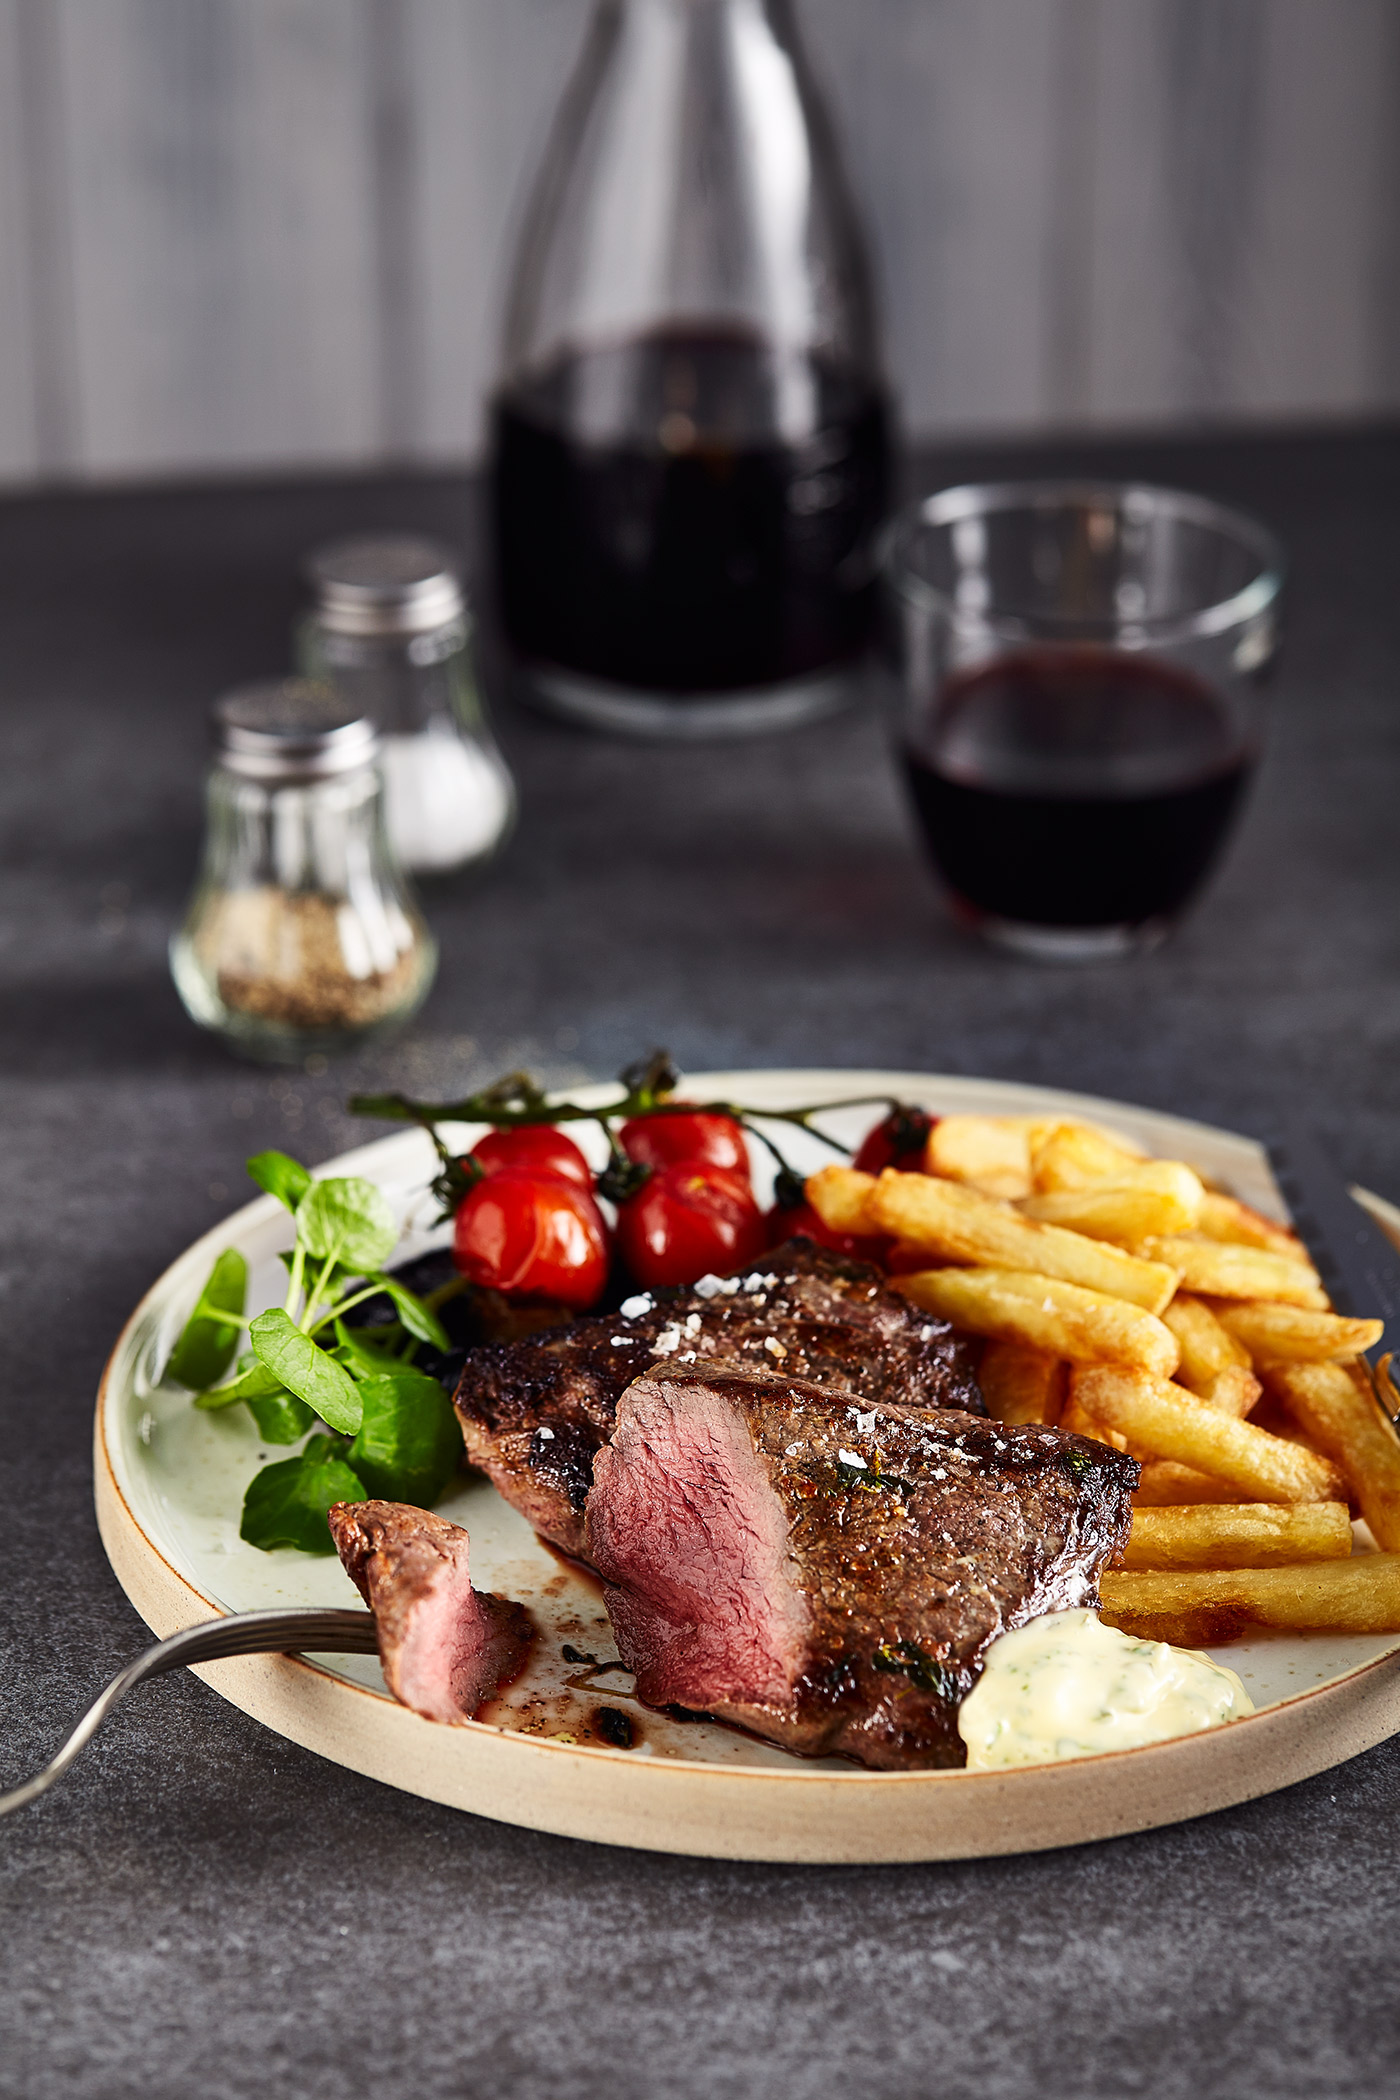 Venison Haunch Steak and Fries, The Hebridean Food Company